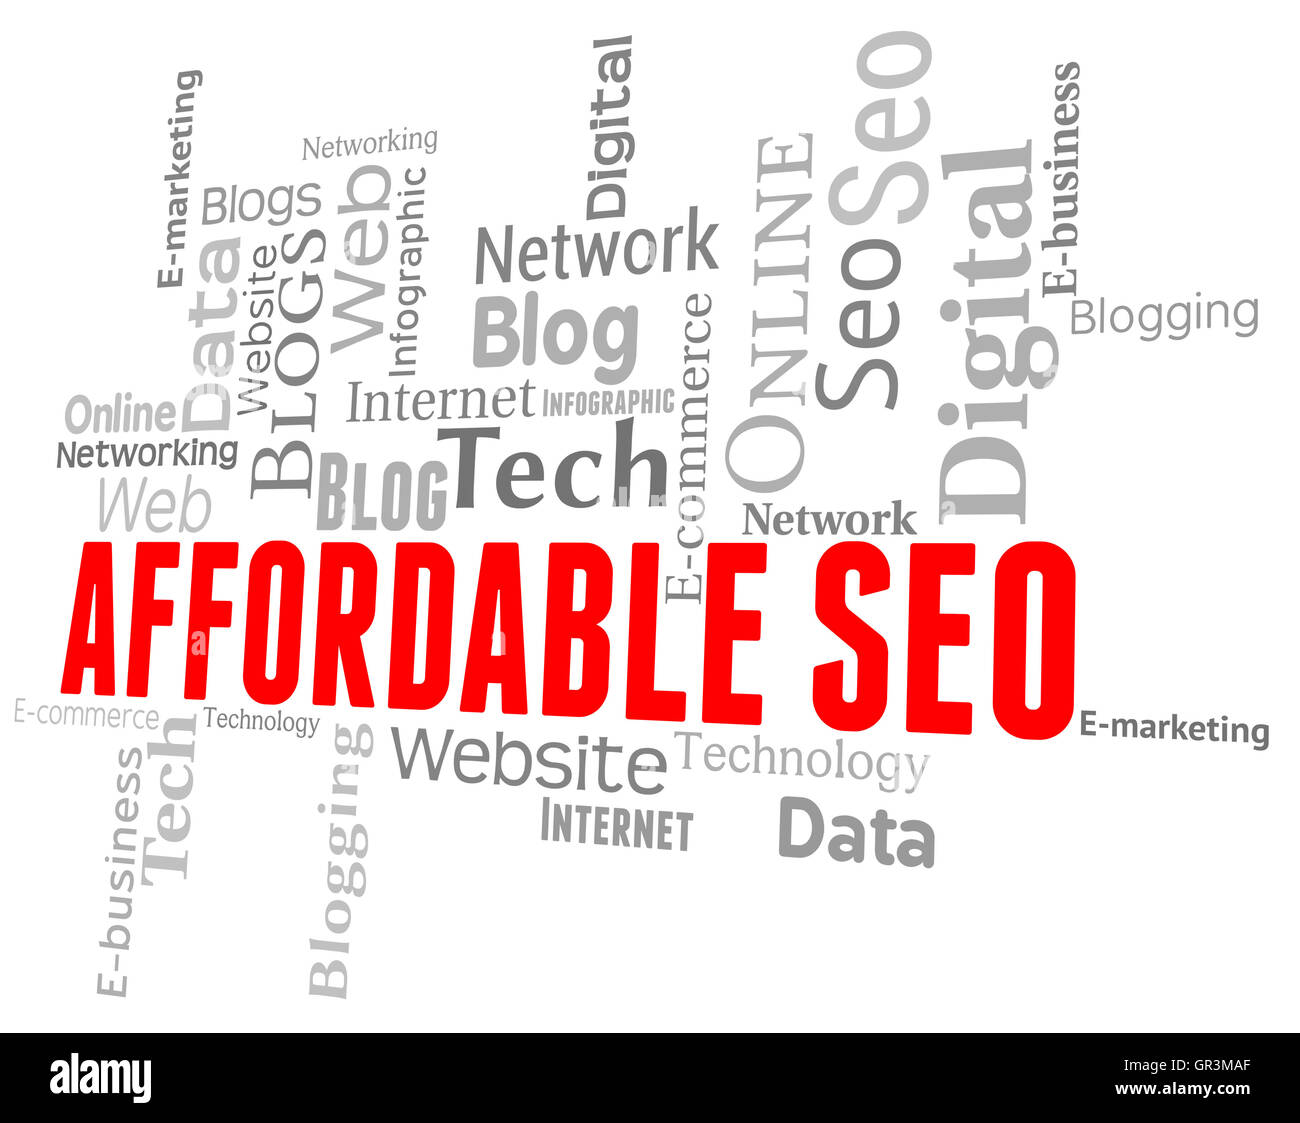 Affordable Seo Indicating Search Engines And Wordclouds Stock Photo